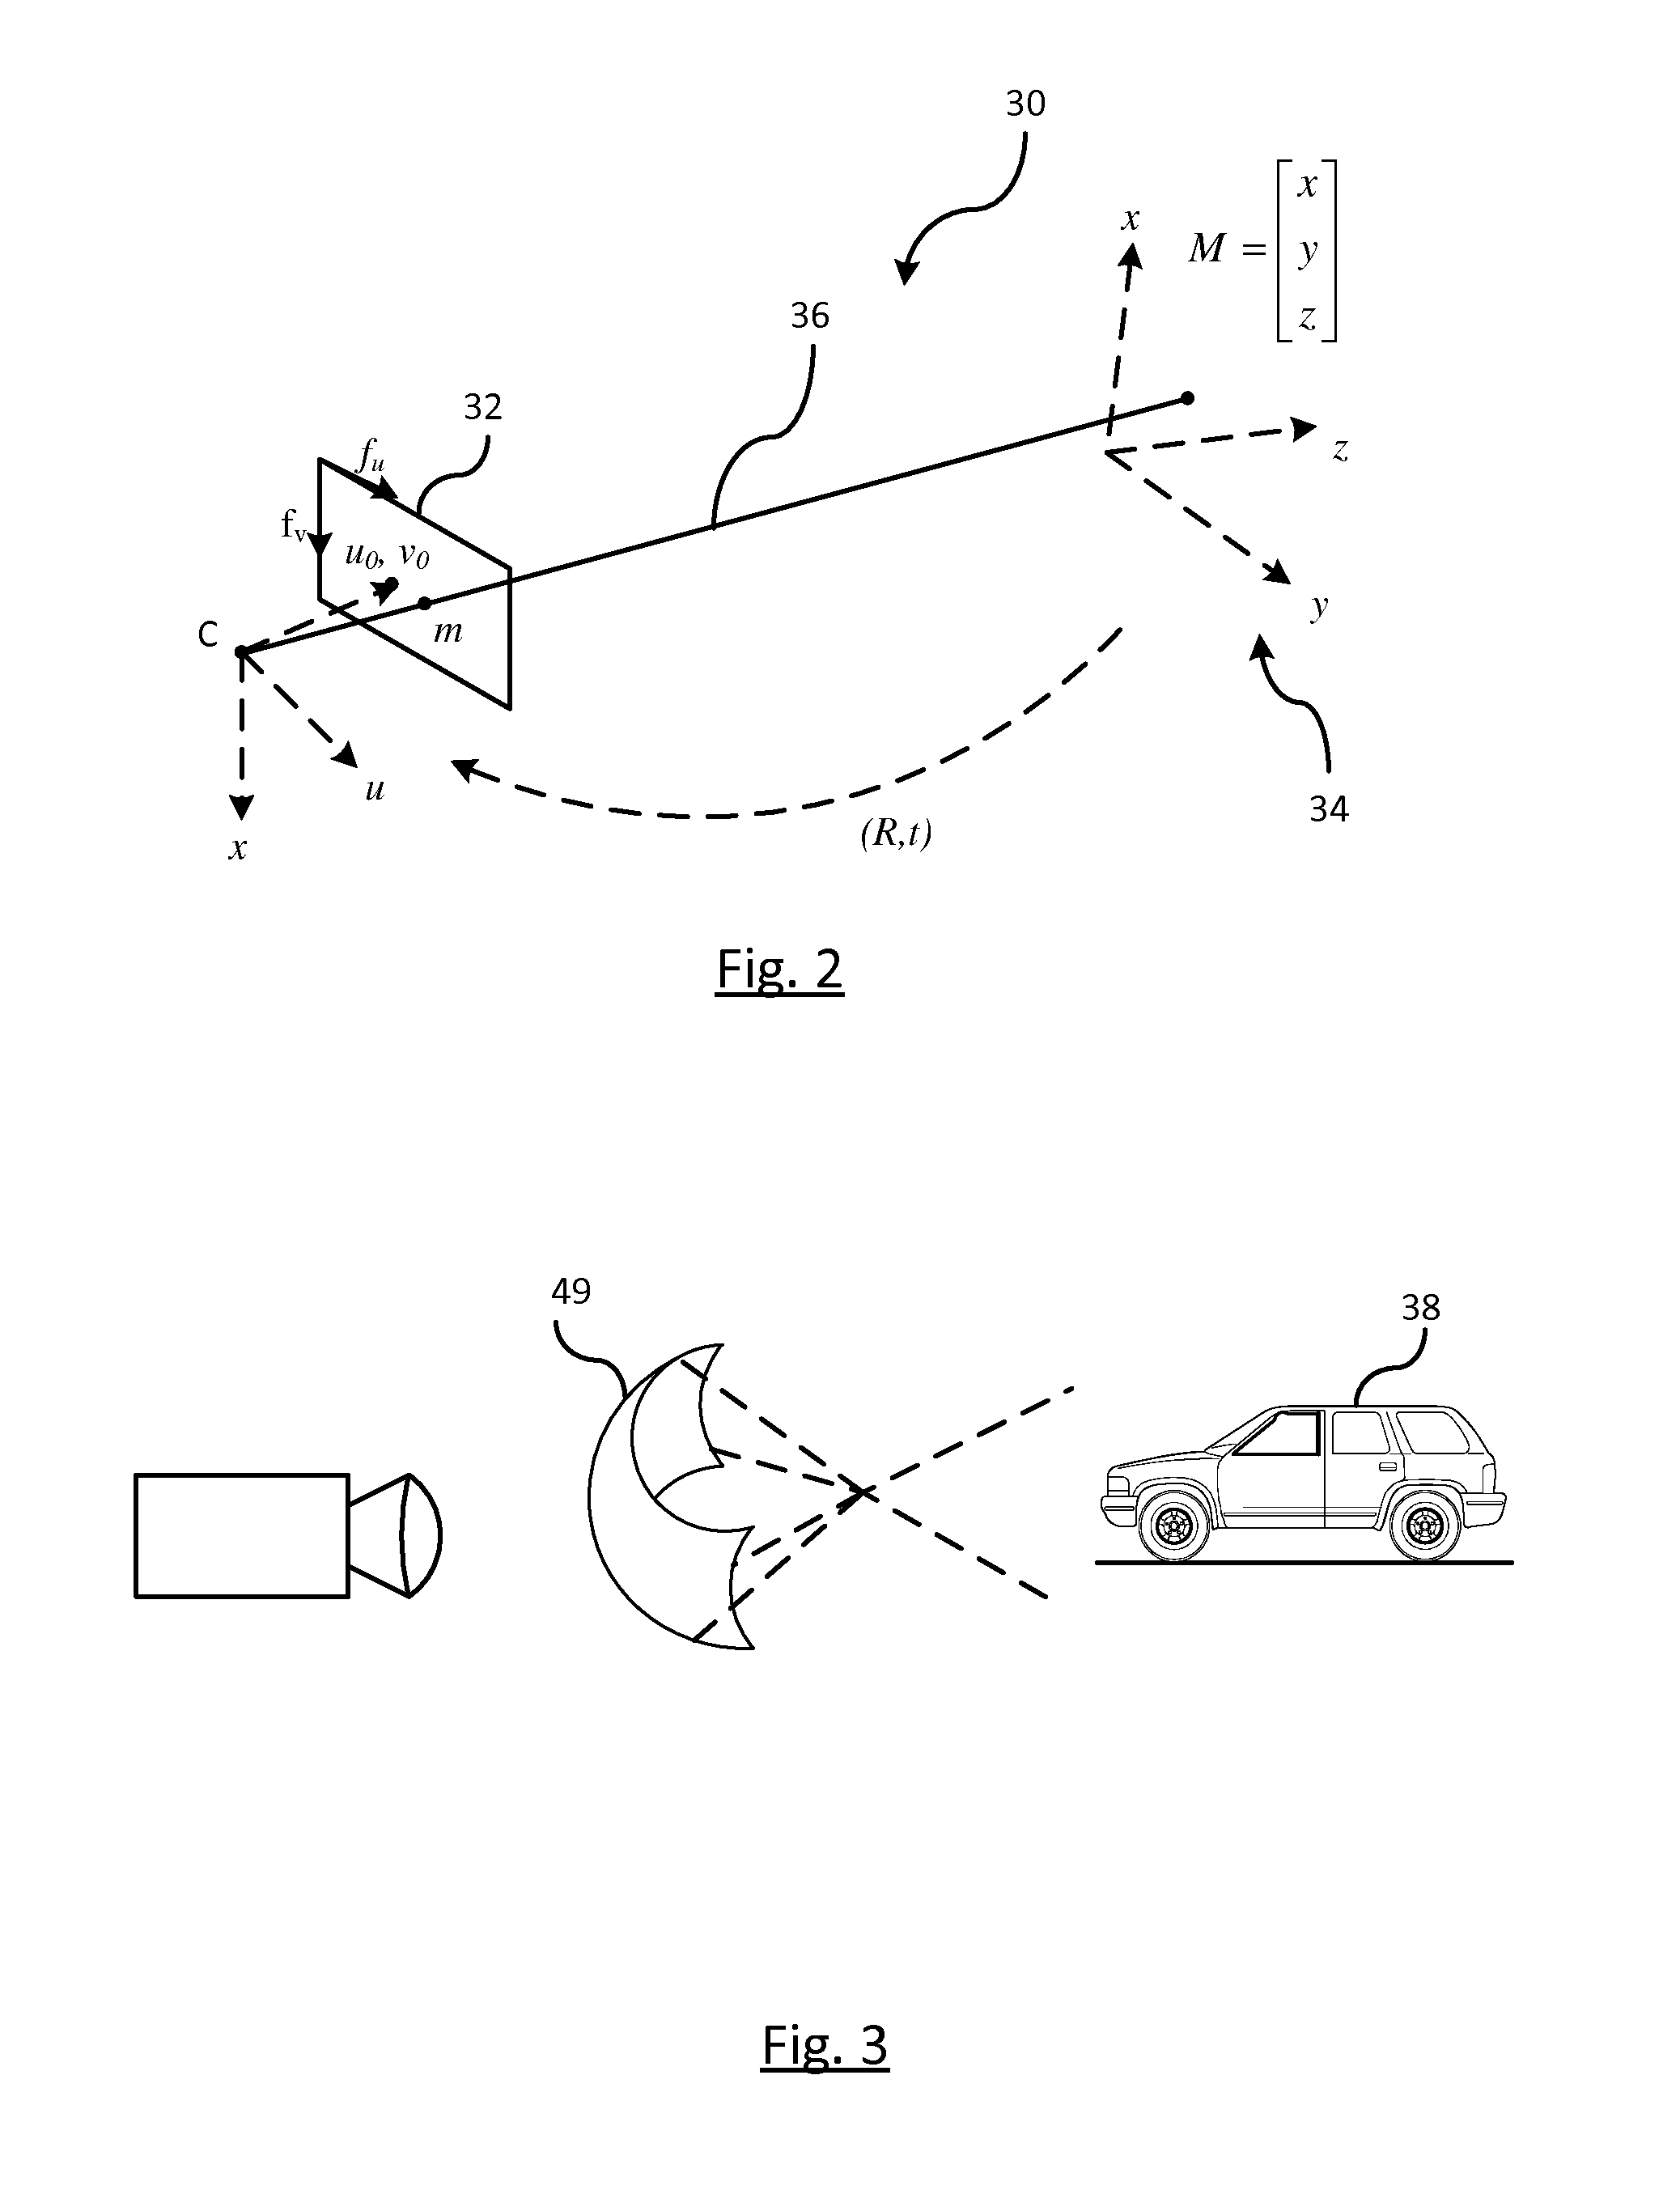 Vision-based object sensing and highlighting in vehicle image display systems